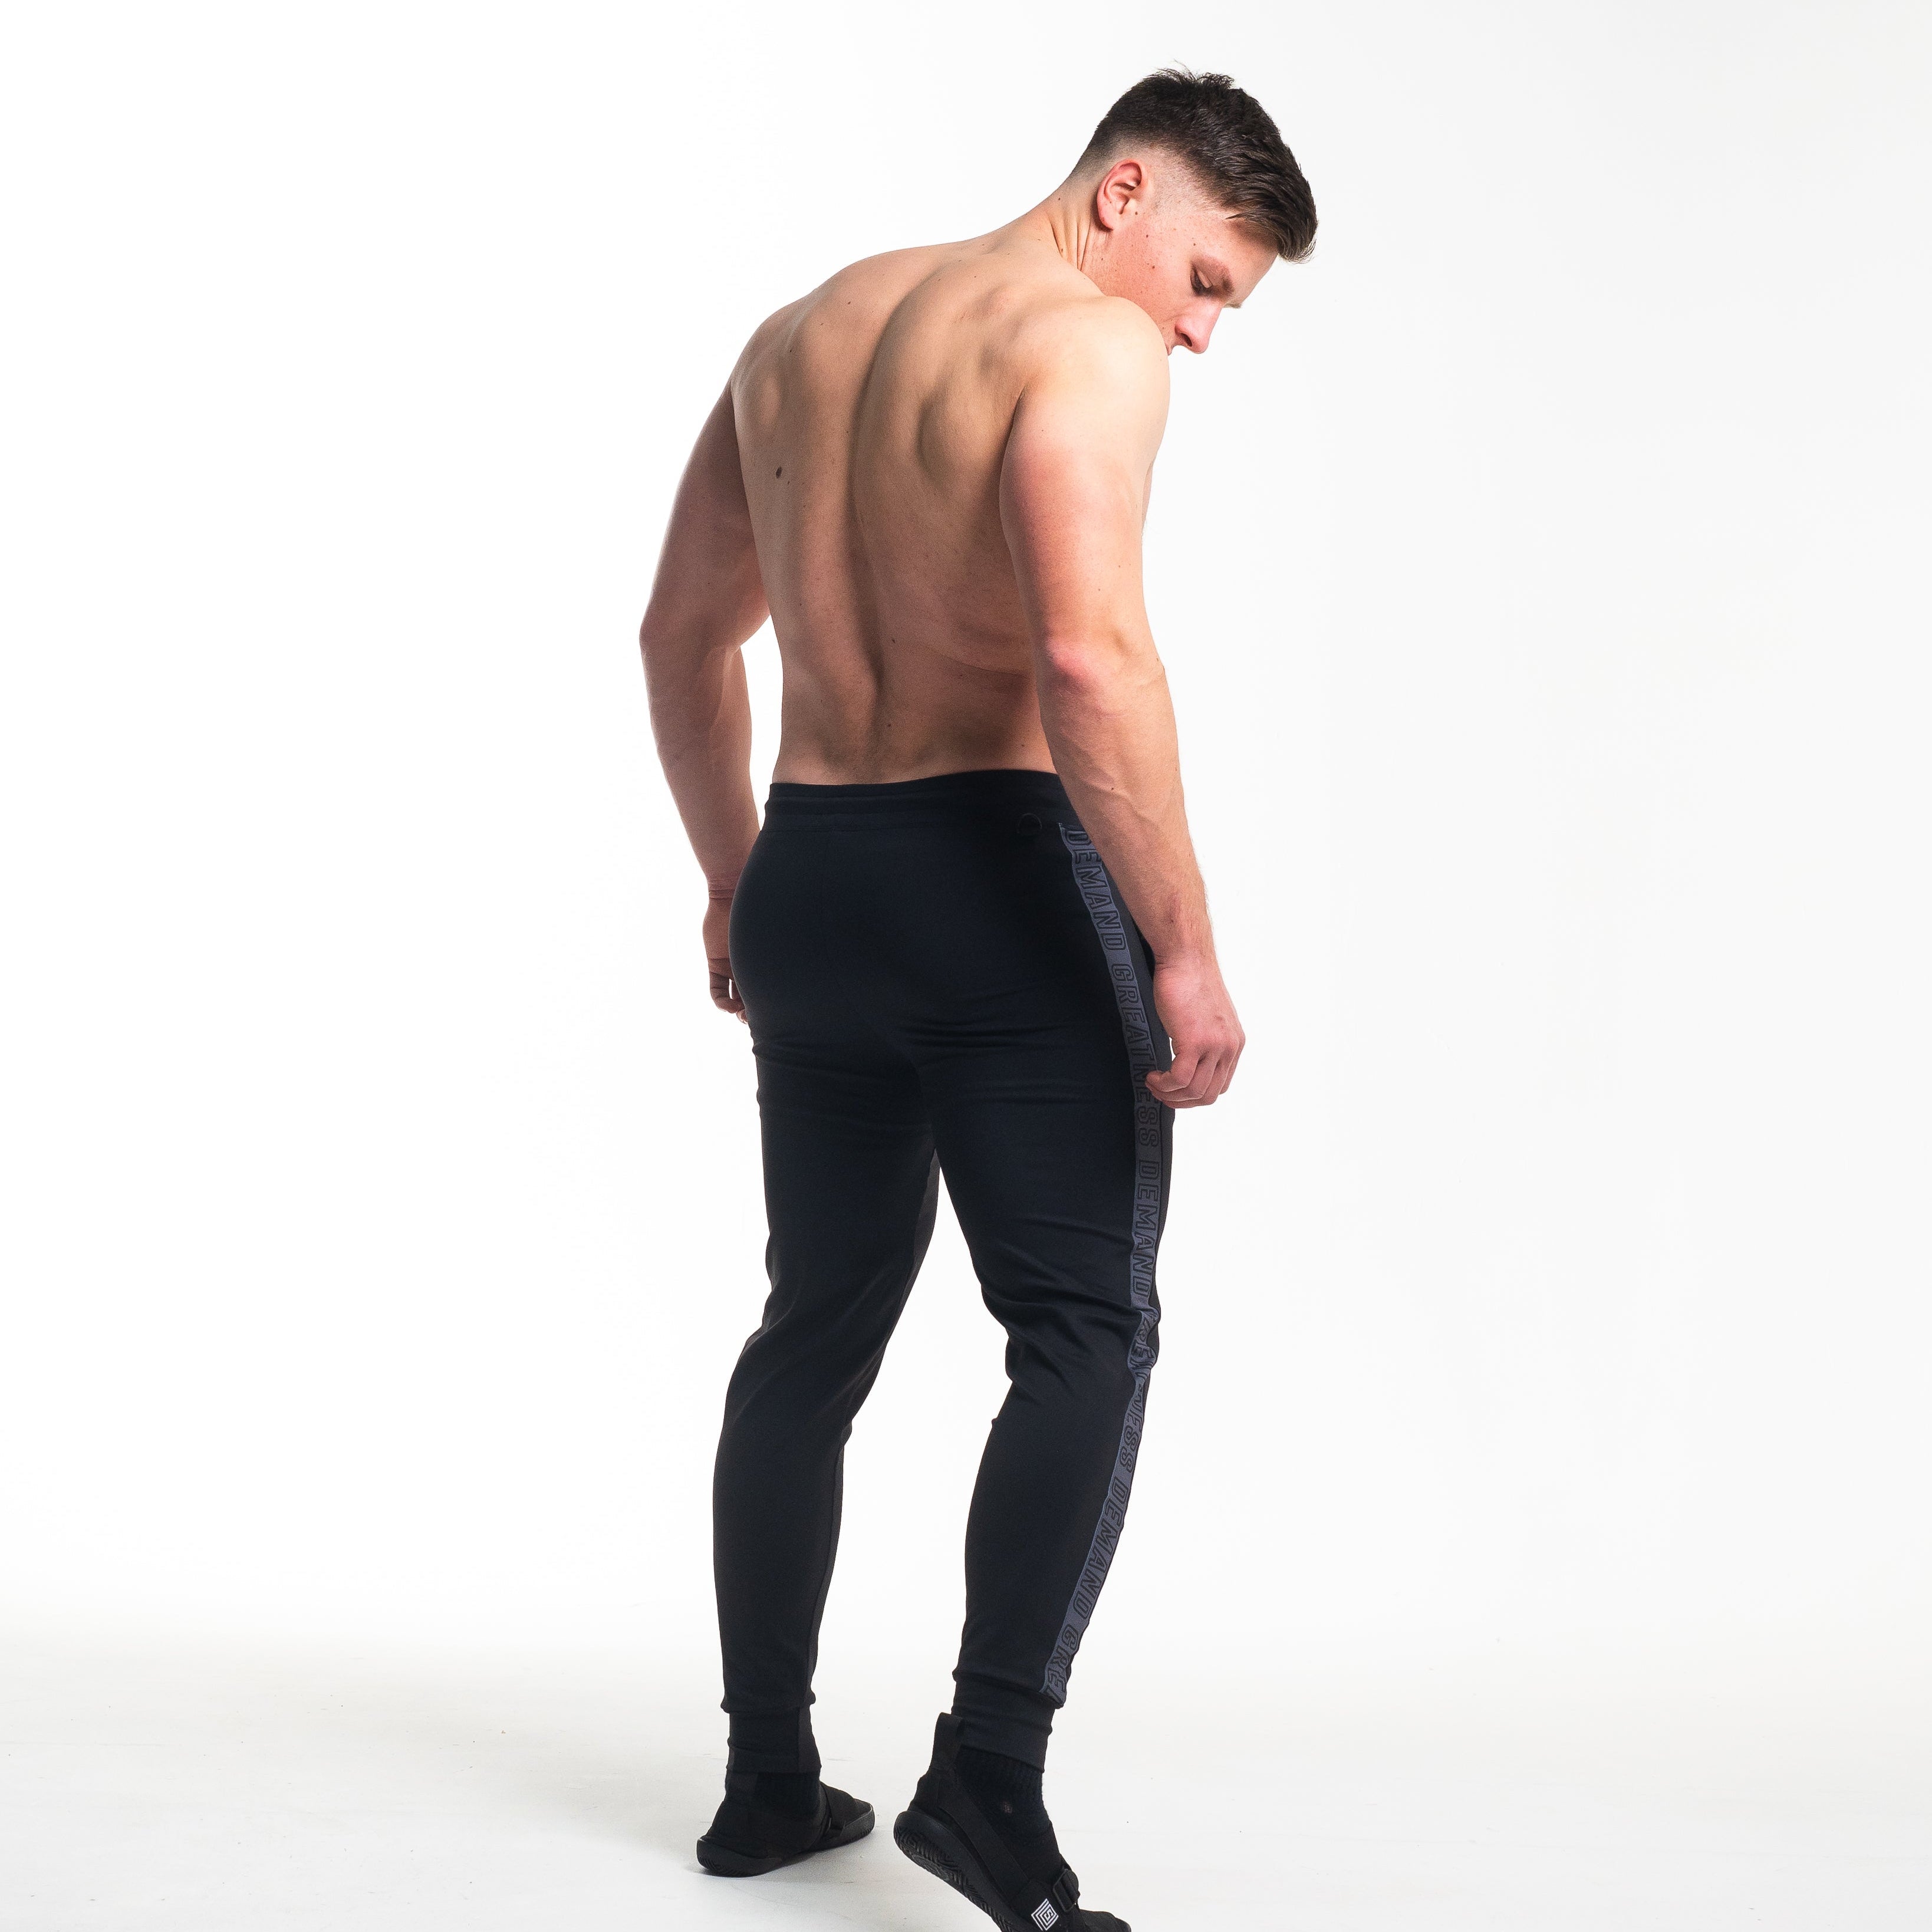 A7 Shadow Stone Defy joggers are just as comfortable in the gym as they are going out. These are made with premium moisture-wicking 4-way-stretch material for greater range of motion. These are a great fit for both men and women. All A7 Powerlifting Equipment shipping to UK, Norway, Switzerland and Iceland.